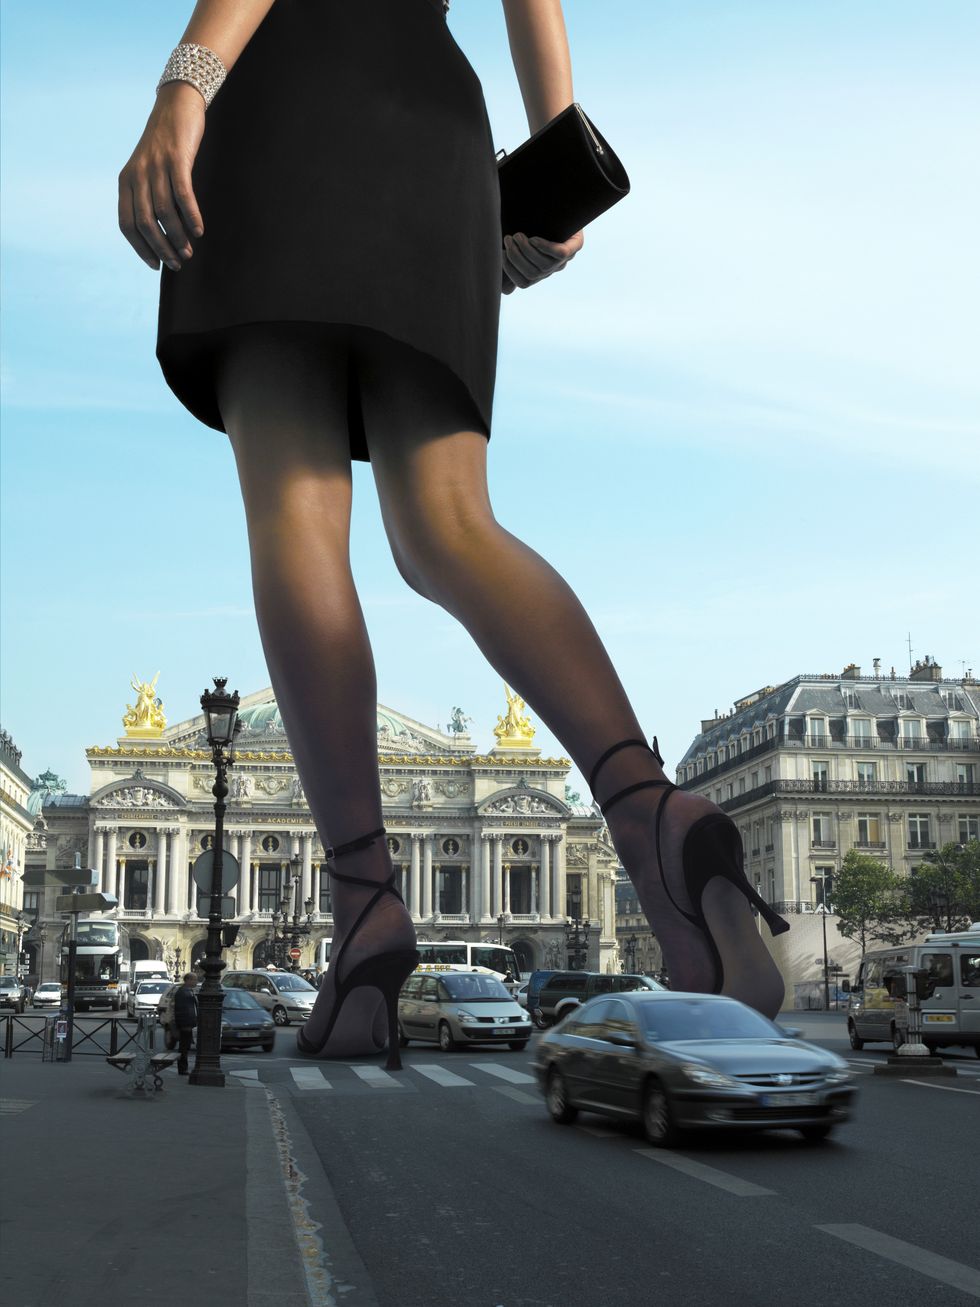 giant woman crossing busy road, low section digital composite